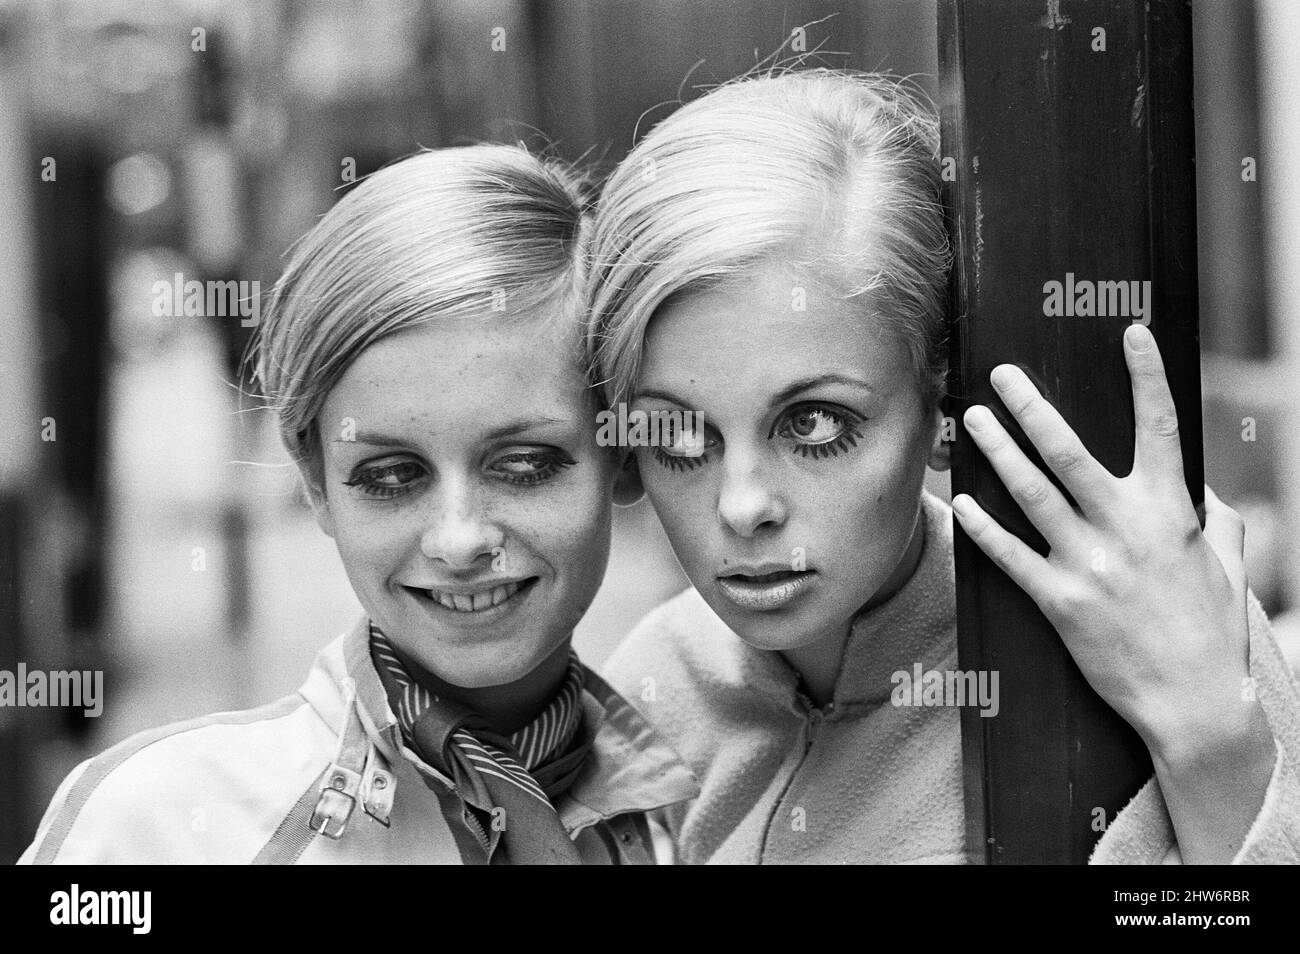 60s Supermodel Twiggy Recreates a Classic Photo - 56 Years Later